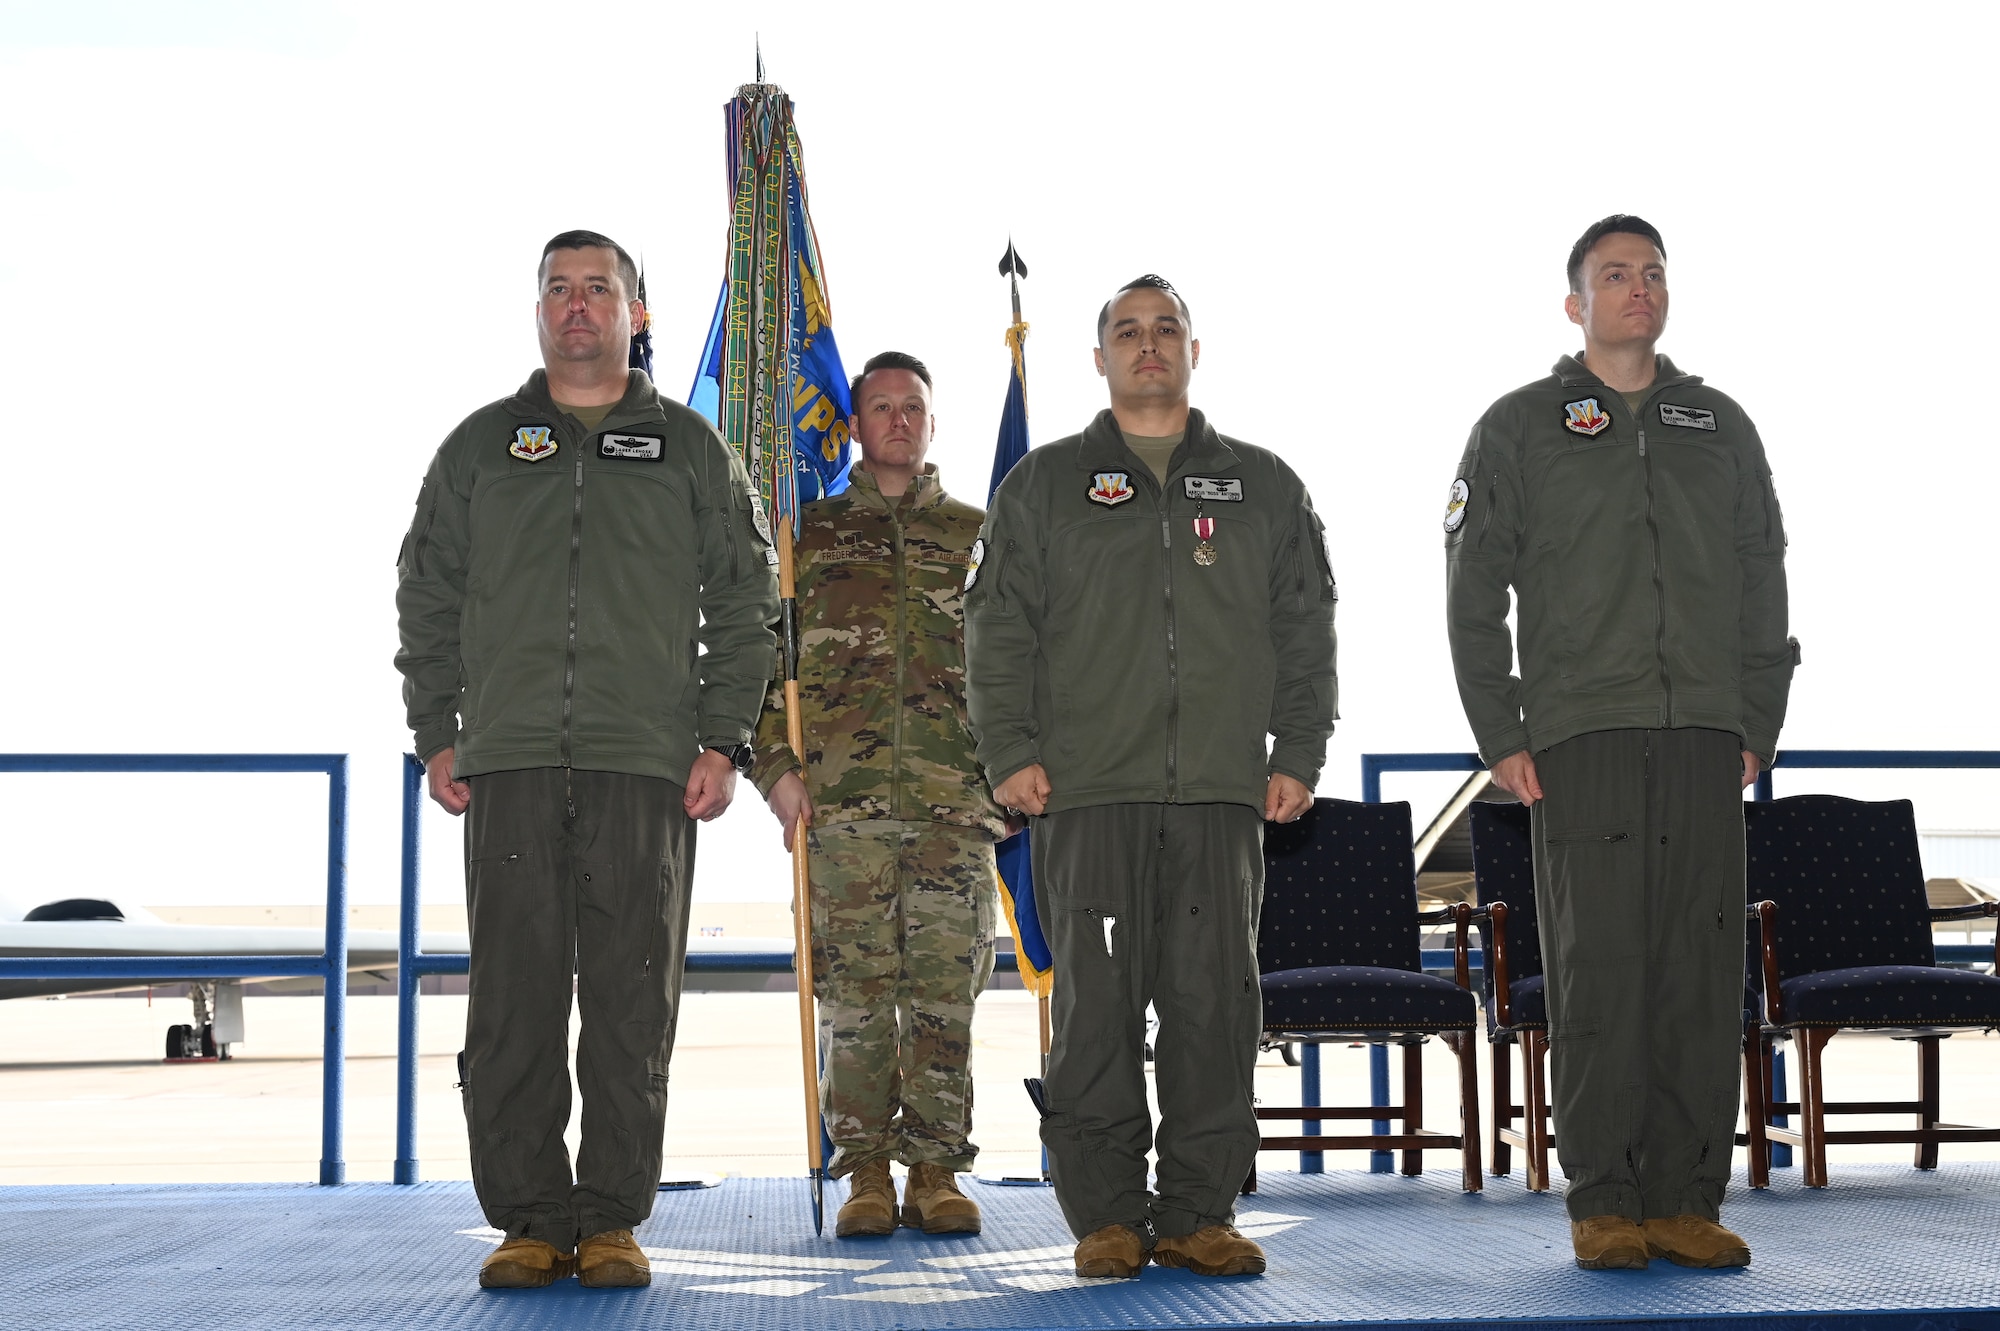 Col. Daniel Lehoski, United States Air Force Weapons School Commandant (left), Lt. Col. Marcus Antonini, previous 325th Weapons Squadron, 57th Wing (center), and Lt. Col. Alexander Reich, 325th Weapons Squadron, 57th Wing (right), stand at attention at Whiteman Air Force Base, Missouri, December 14, 2022. Change of commands are a military tradition of passing command from one commanding officer to another. (U.S. Air Force photo by Airman 1st Class Joseph Garcia)